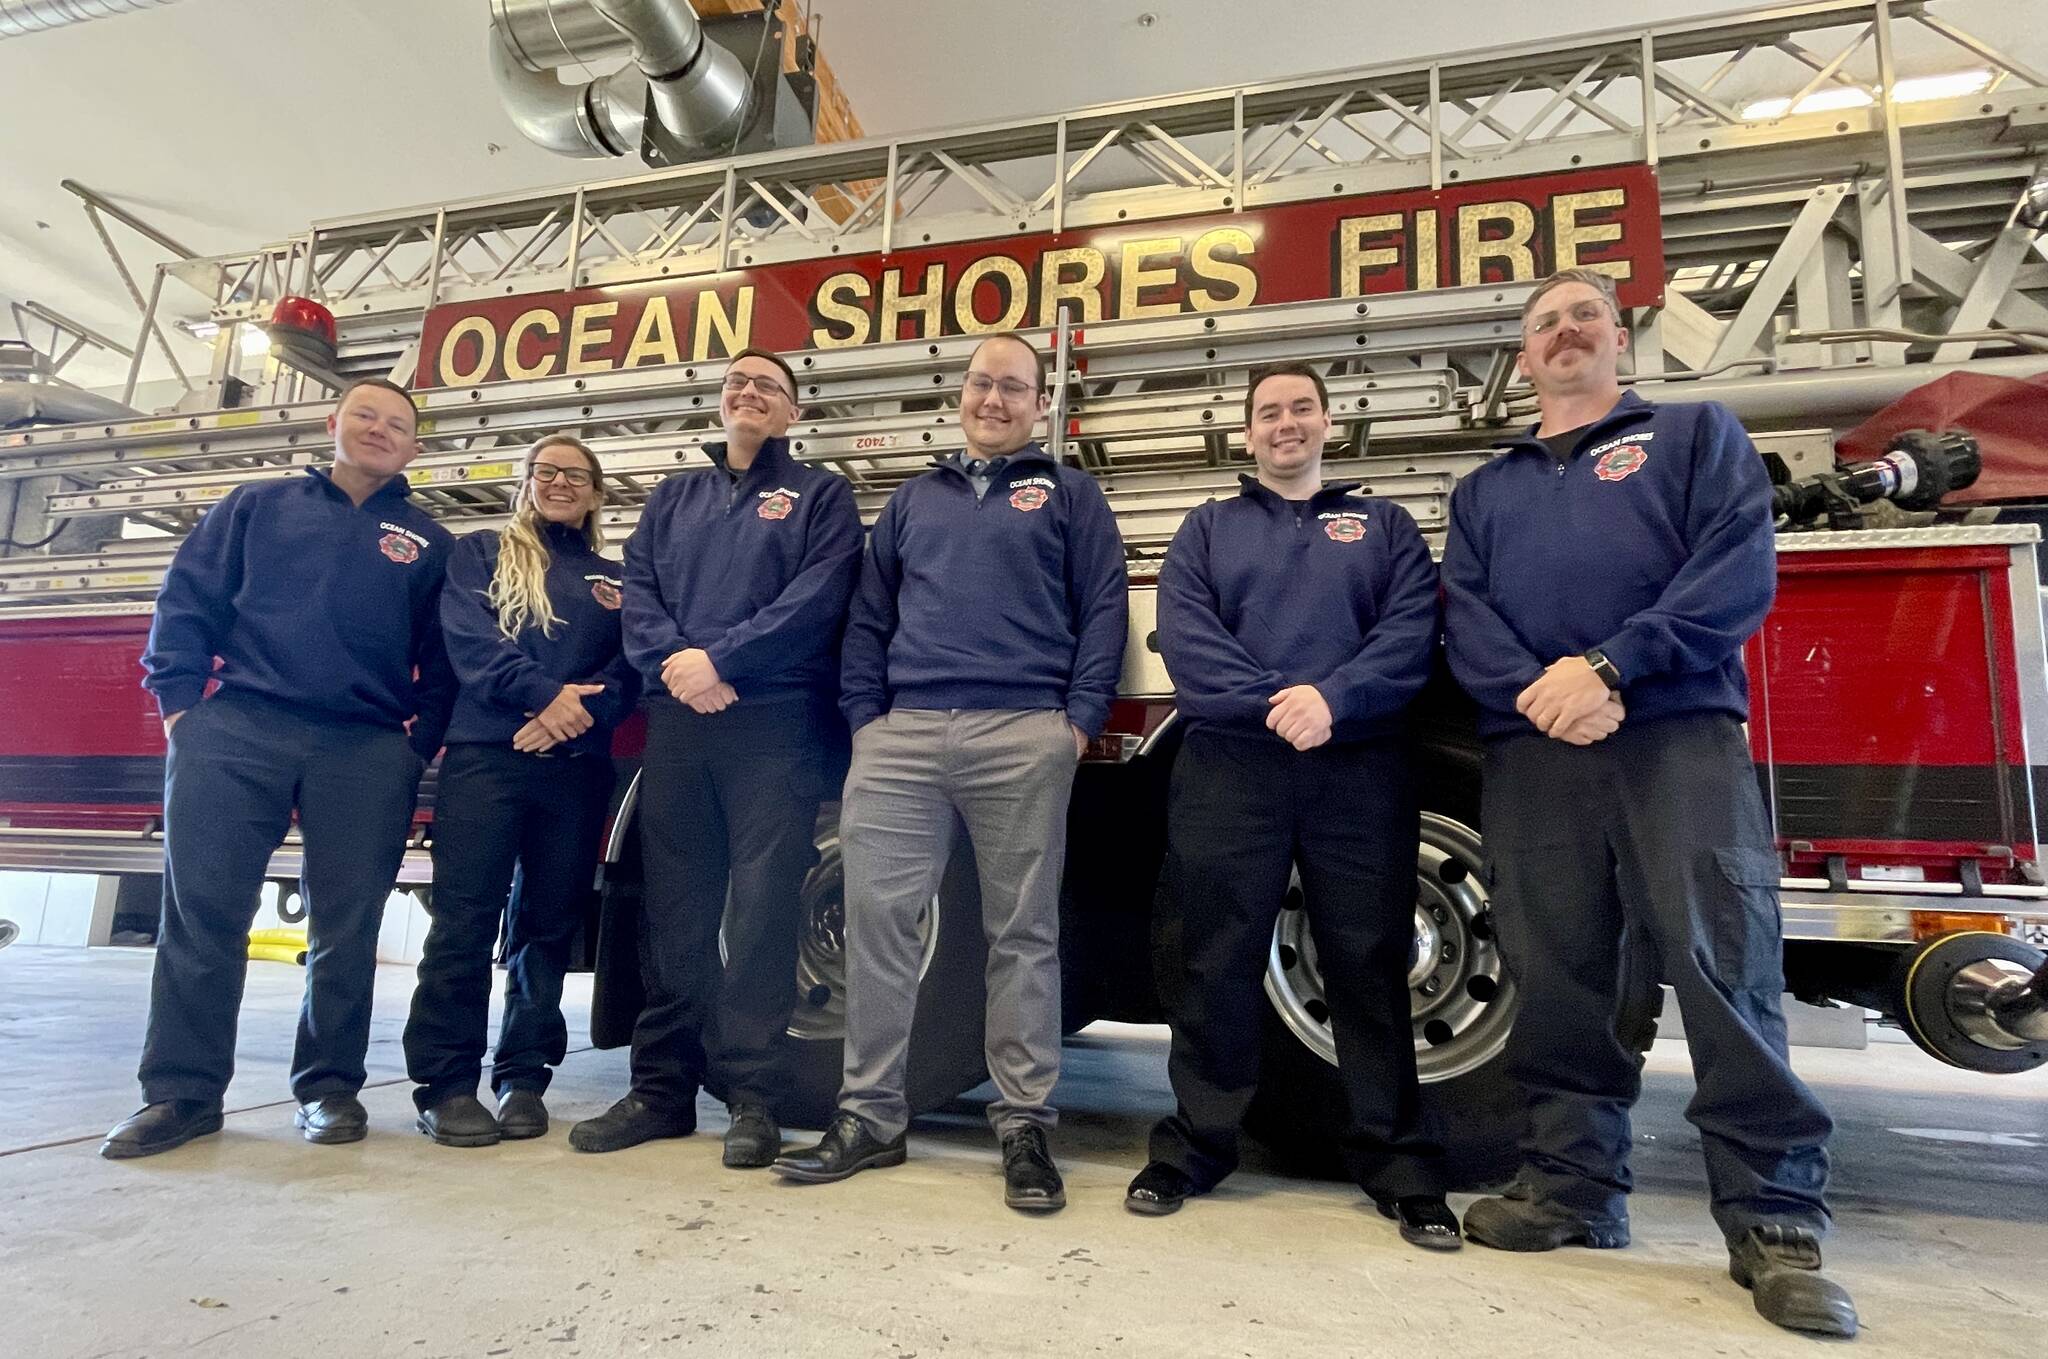 The Ocean Shores Fire Department welcomed six new members this week, bringing up the department’s strength by a full third and enhancing their operational capability. (Michael S. Lockett / The Daily World)